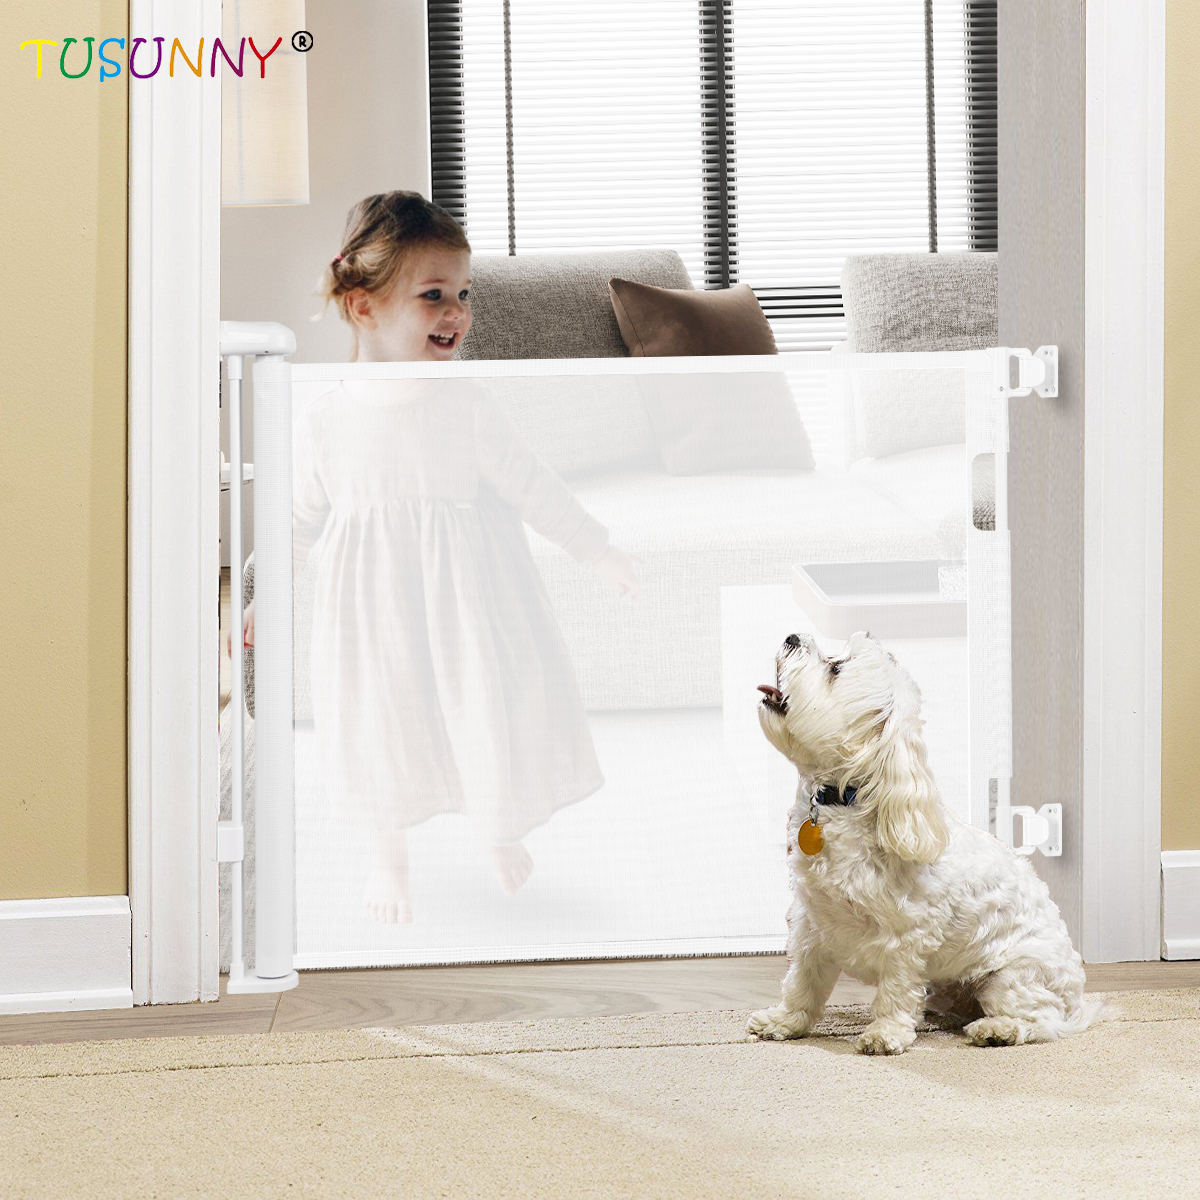 SH20.006B03D Retractable Baby Gate New Kids Safety Mesh Gate